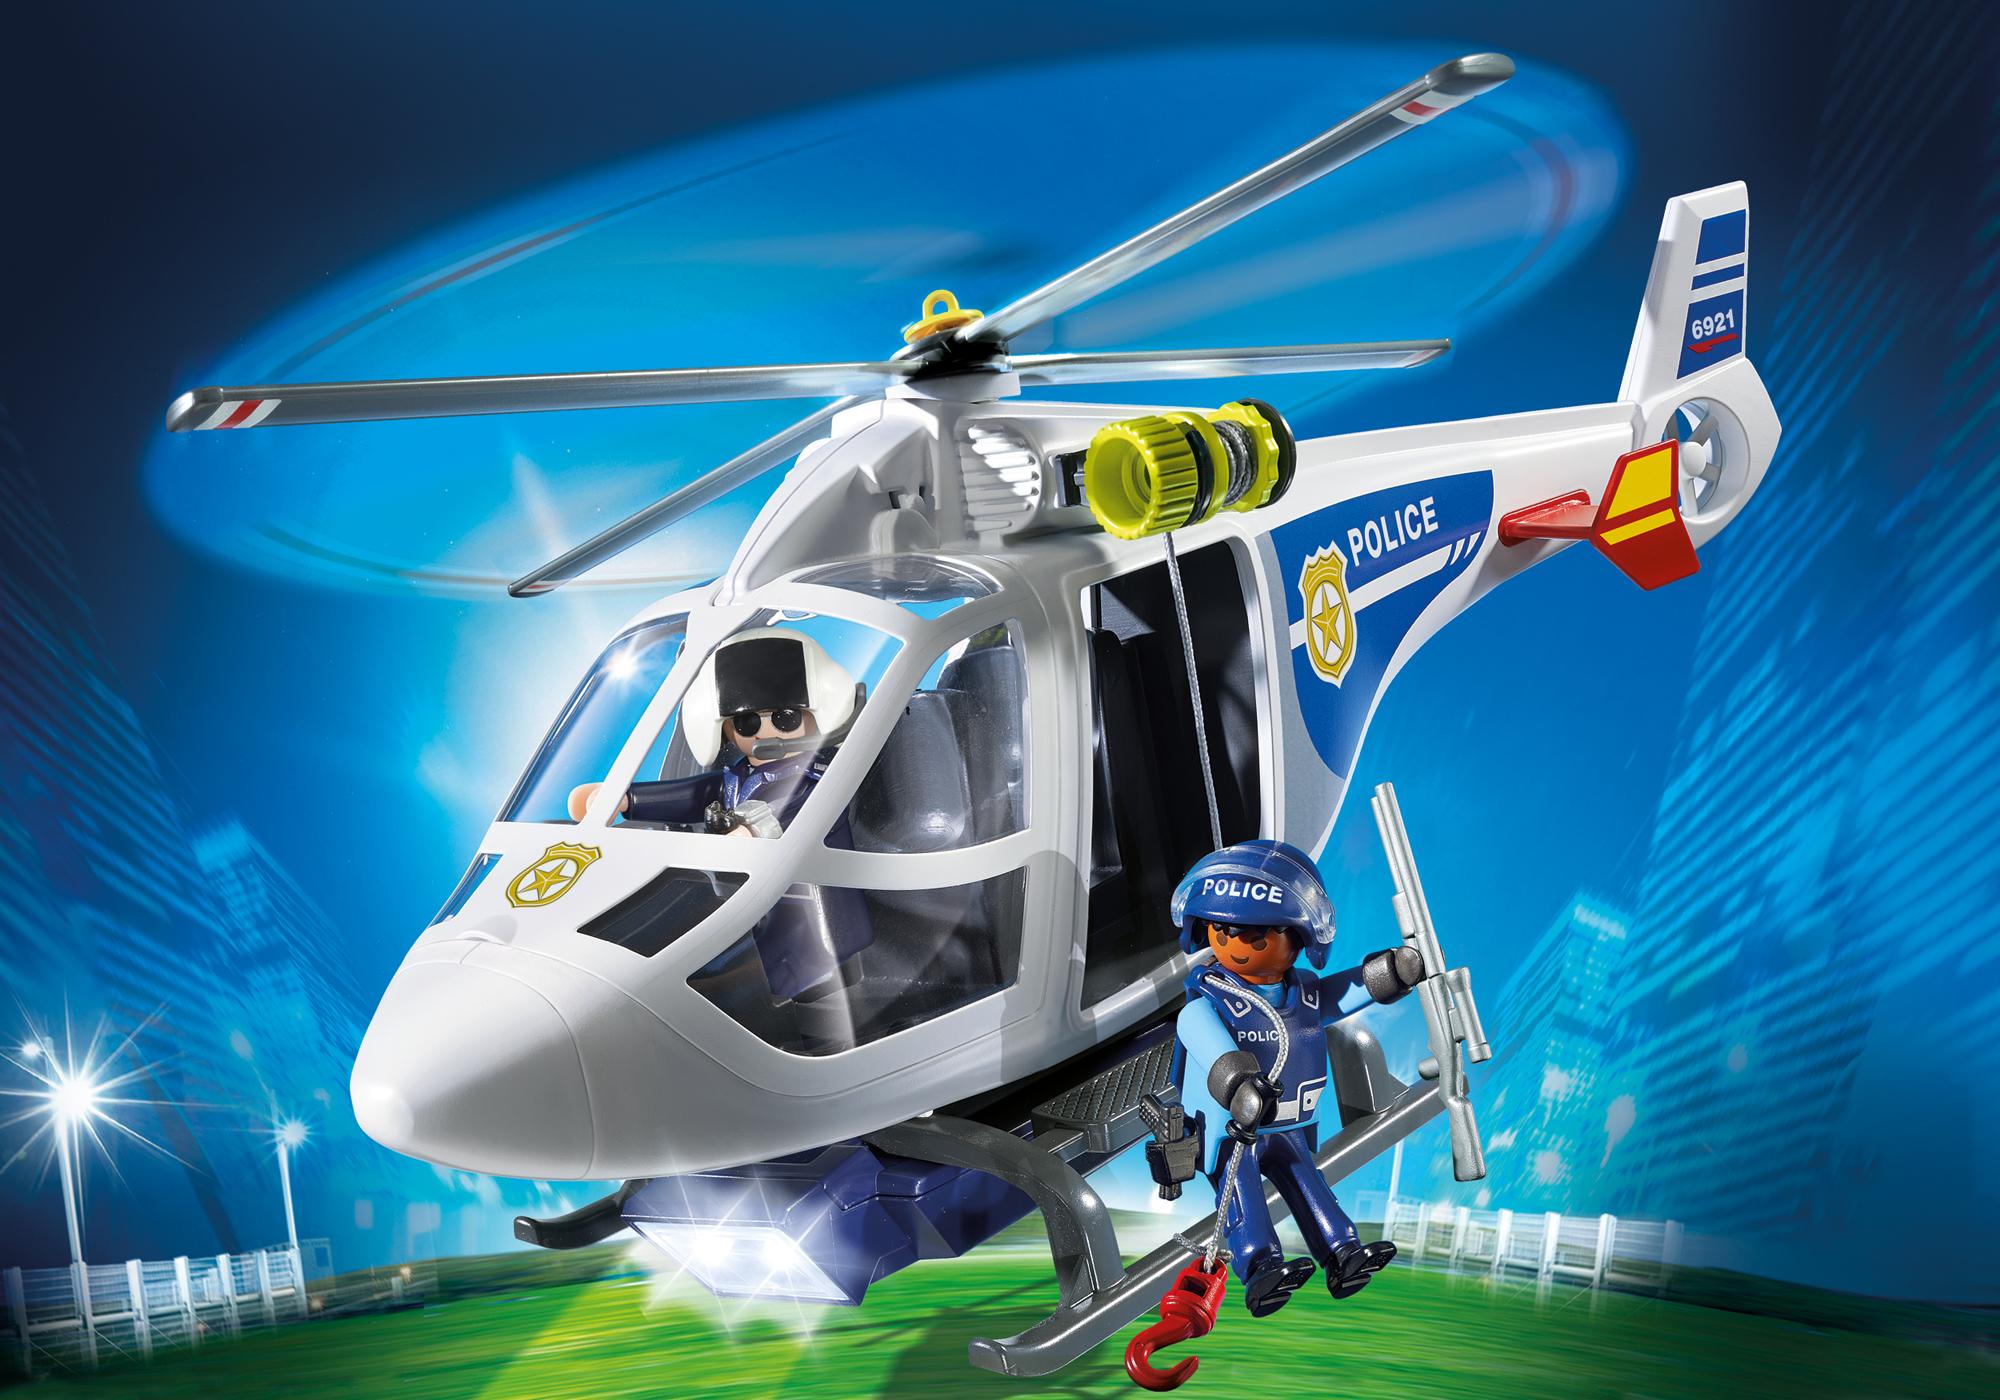 helicoptere police playmobil 6921